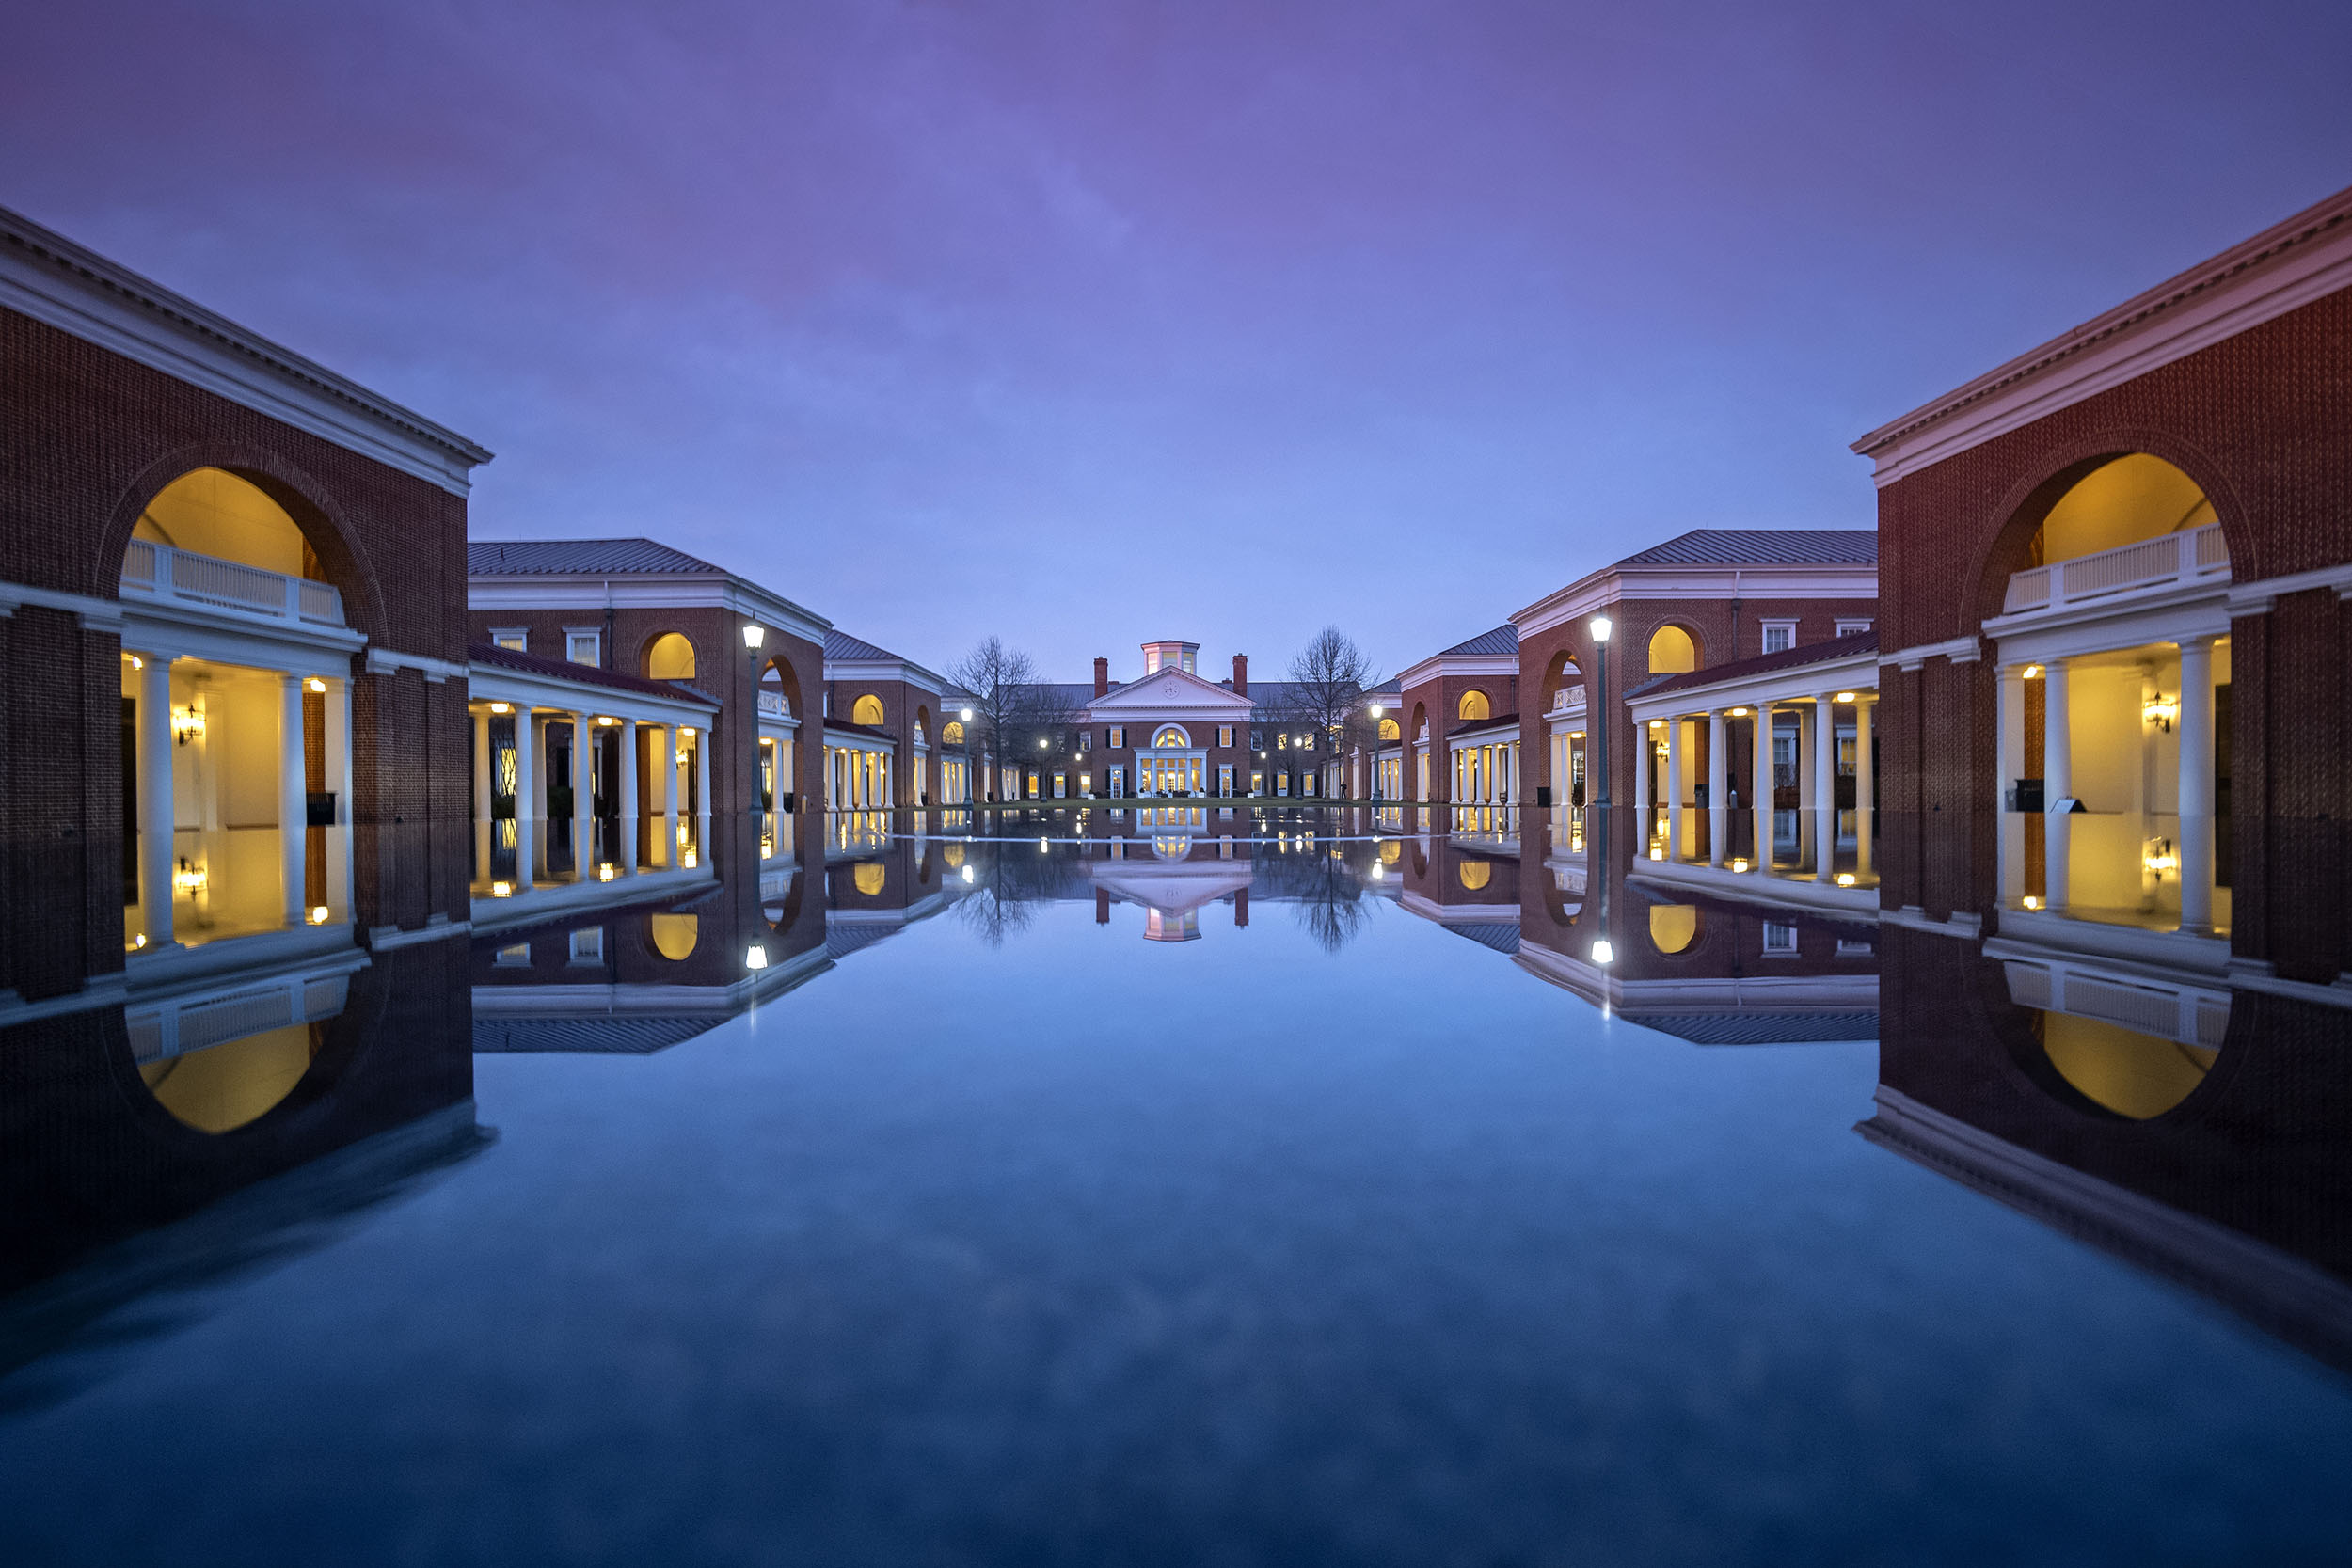 Reflection pond at Darden